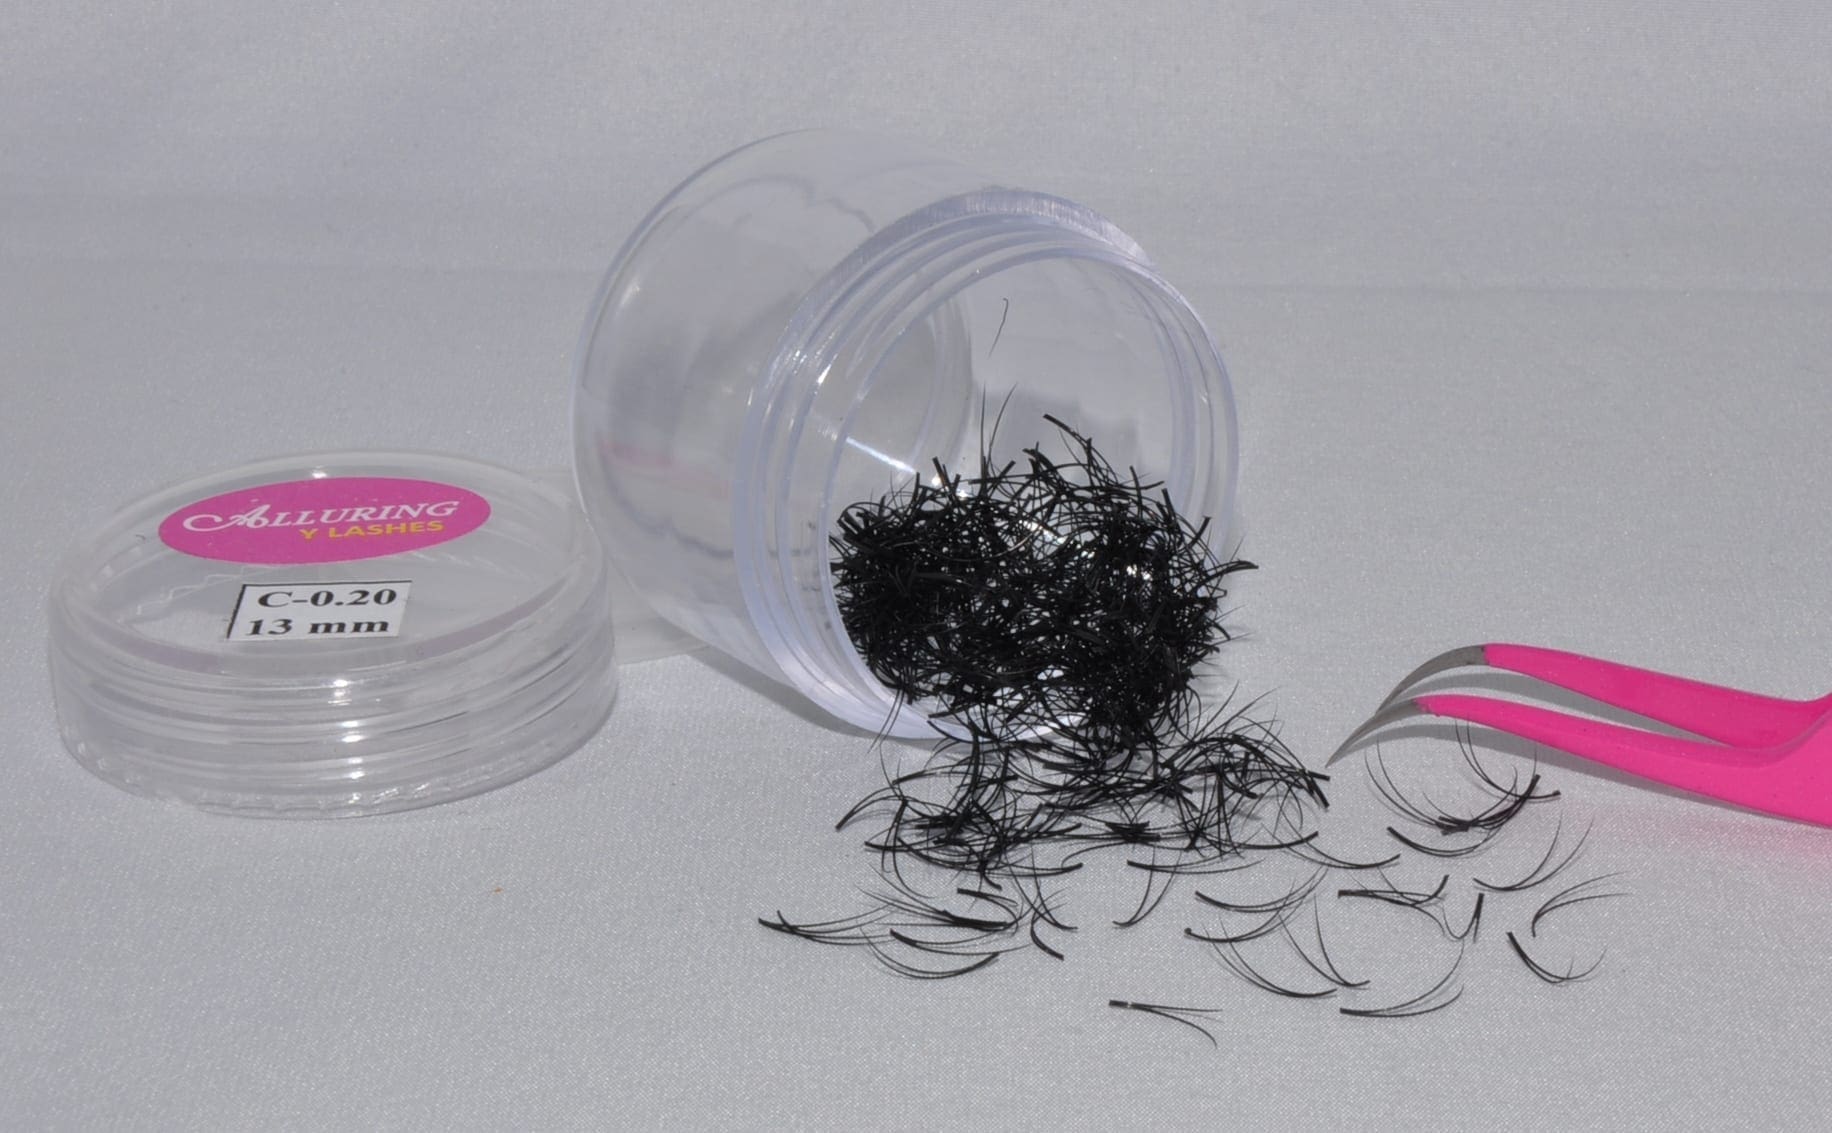 A plastic container with some hair in it